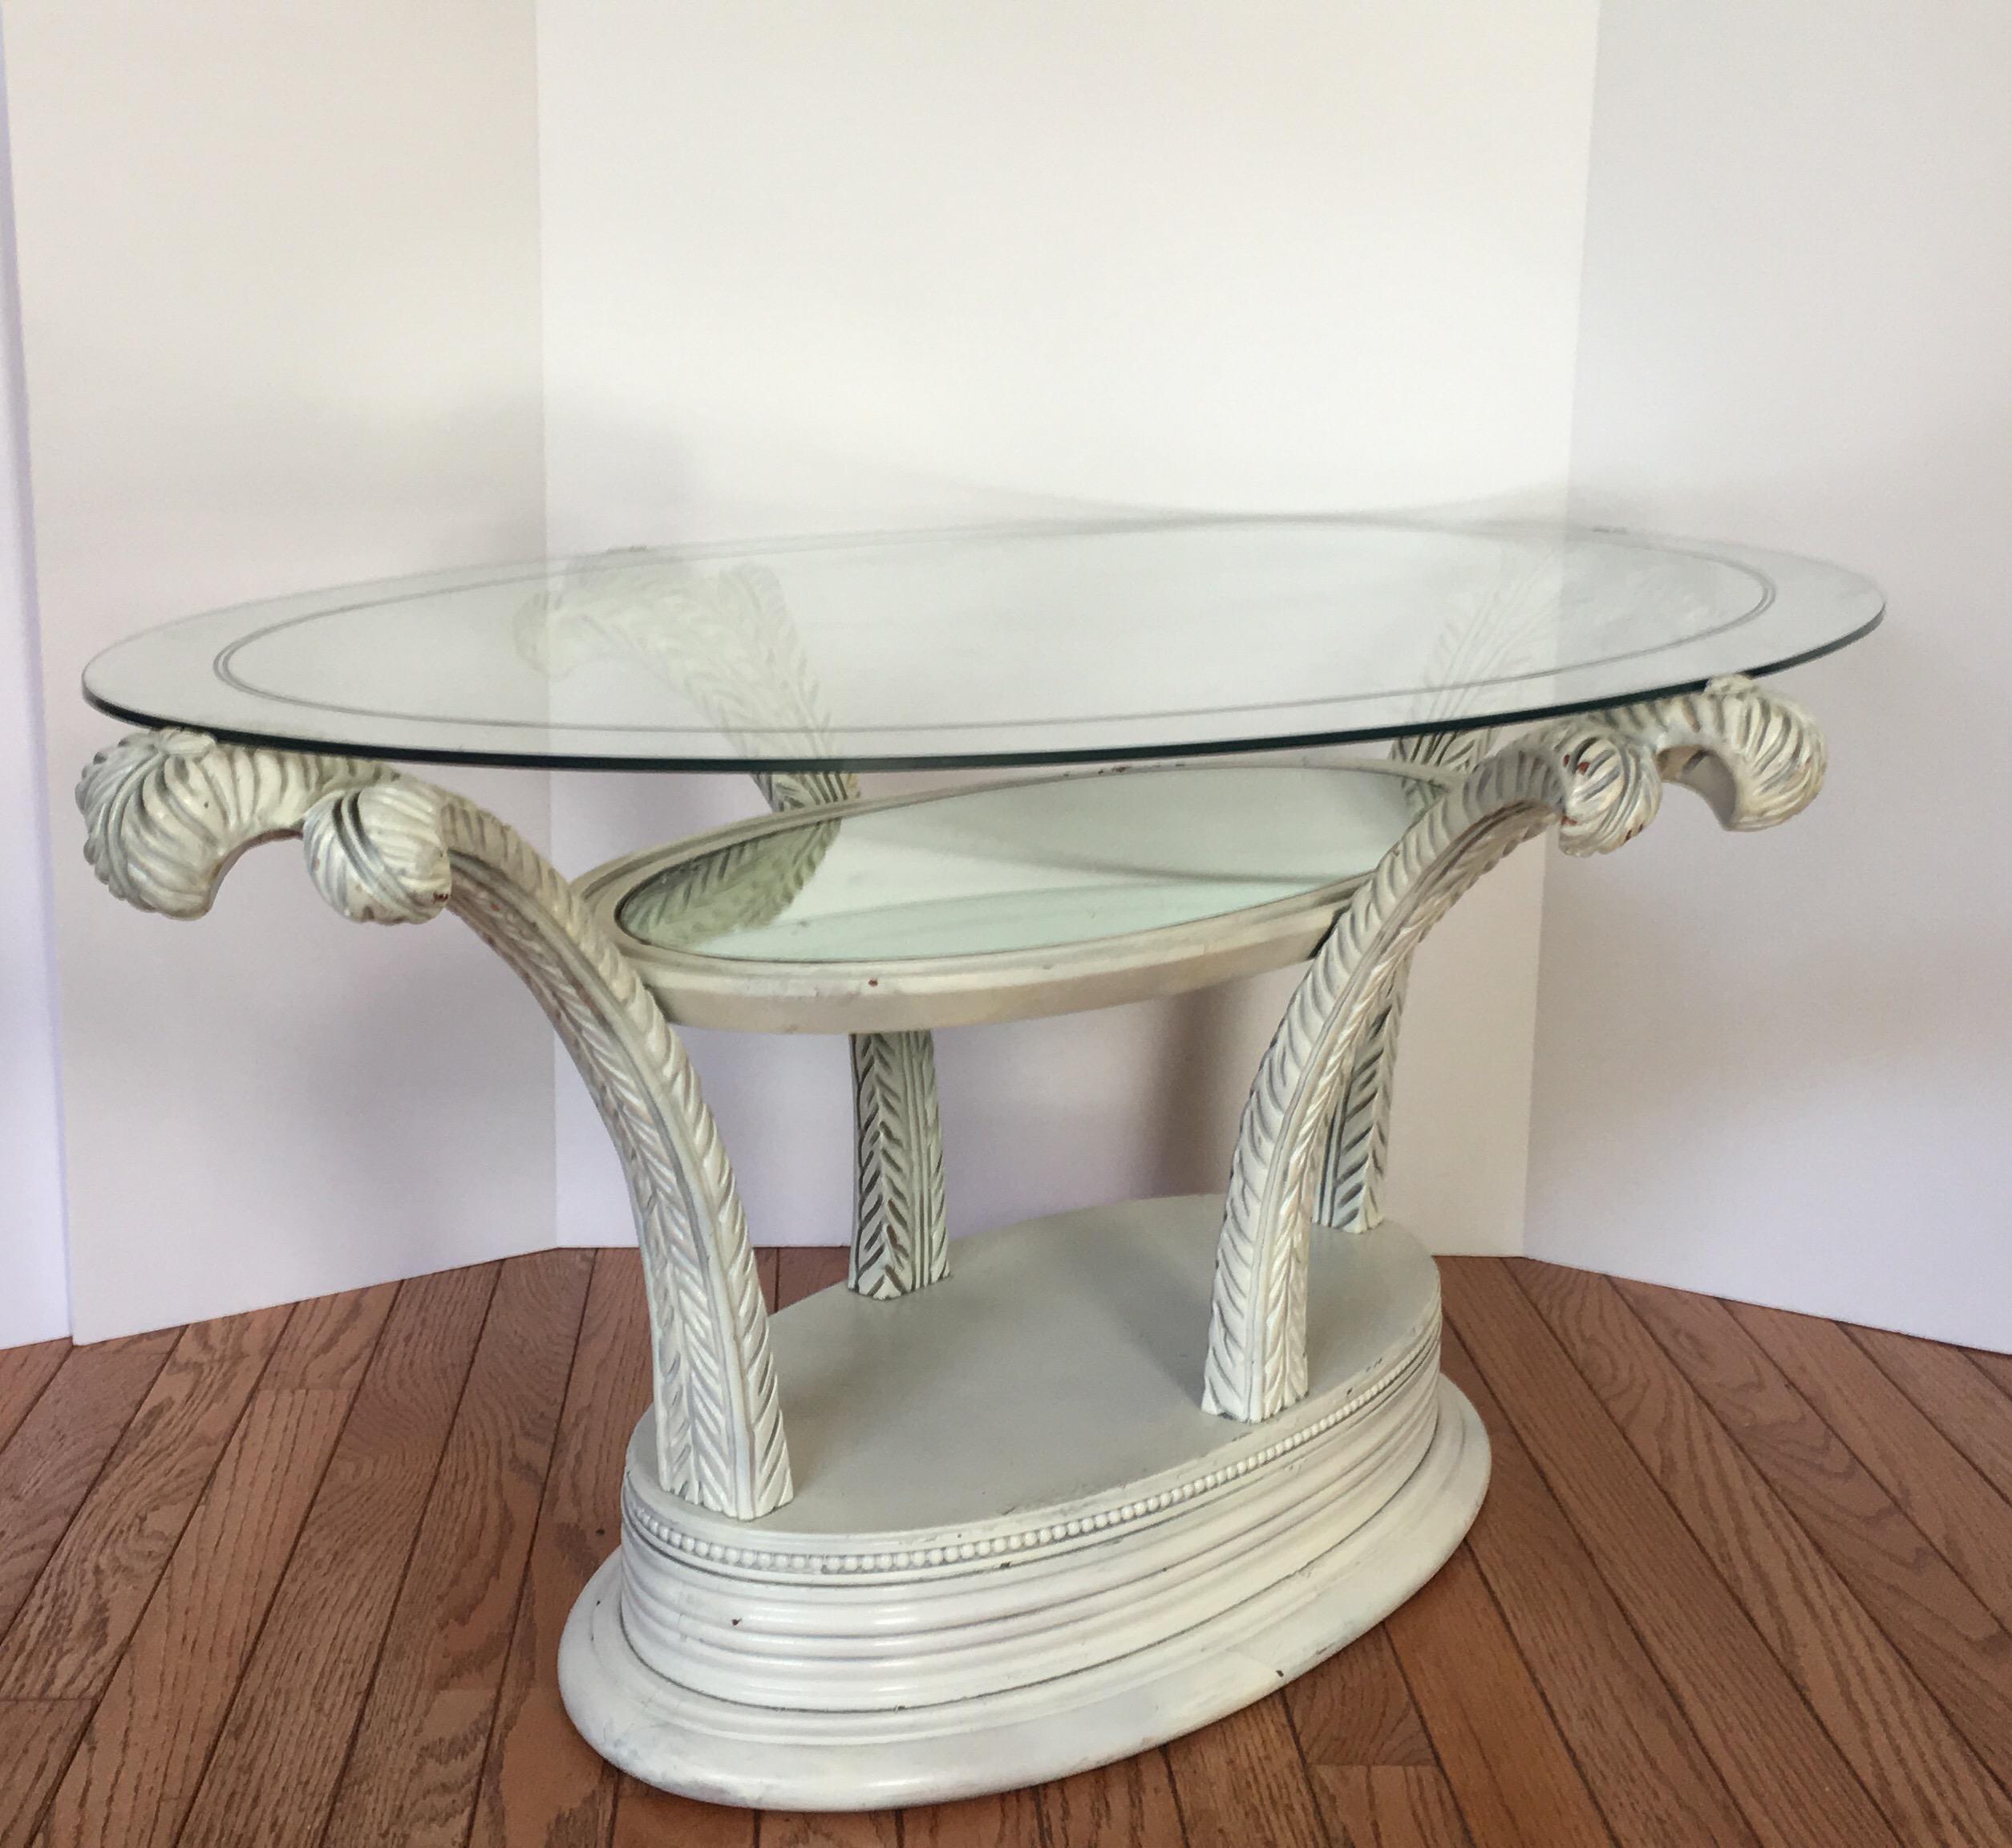 Glamorous Hollywood Regency sculptural coffee table featuring hand carved plumes or palm tree fronds. This occasional cocktail table has three tiers. The lowest tier is the wooden base and can house small knick knacks. The middle tier has original